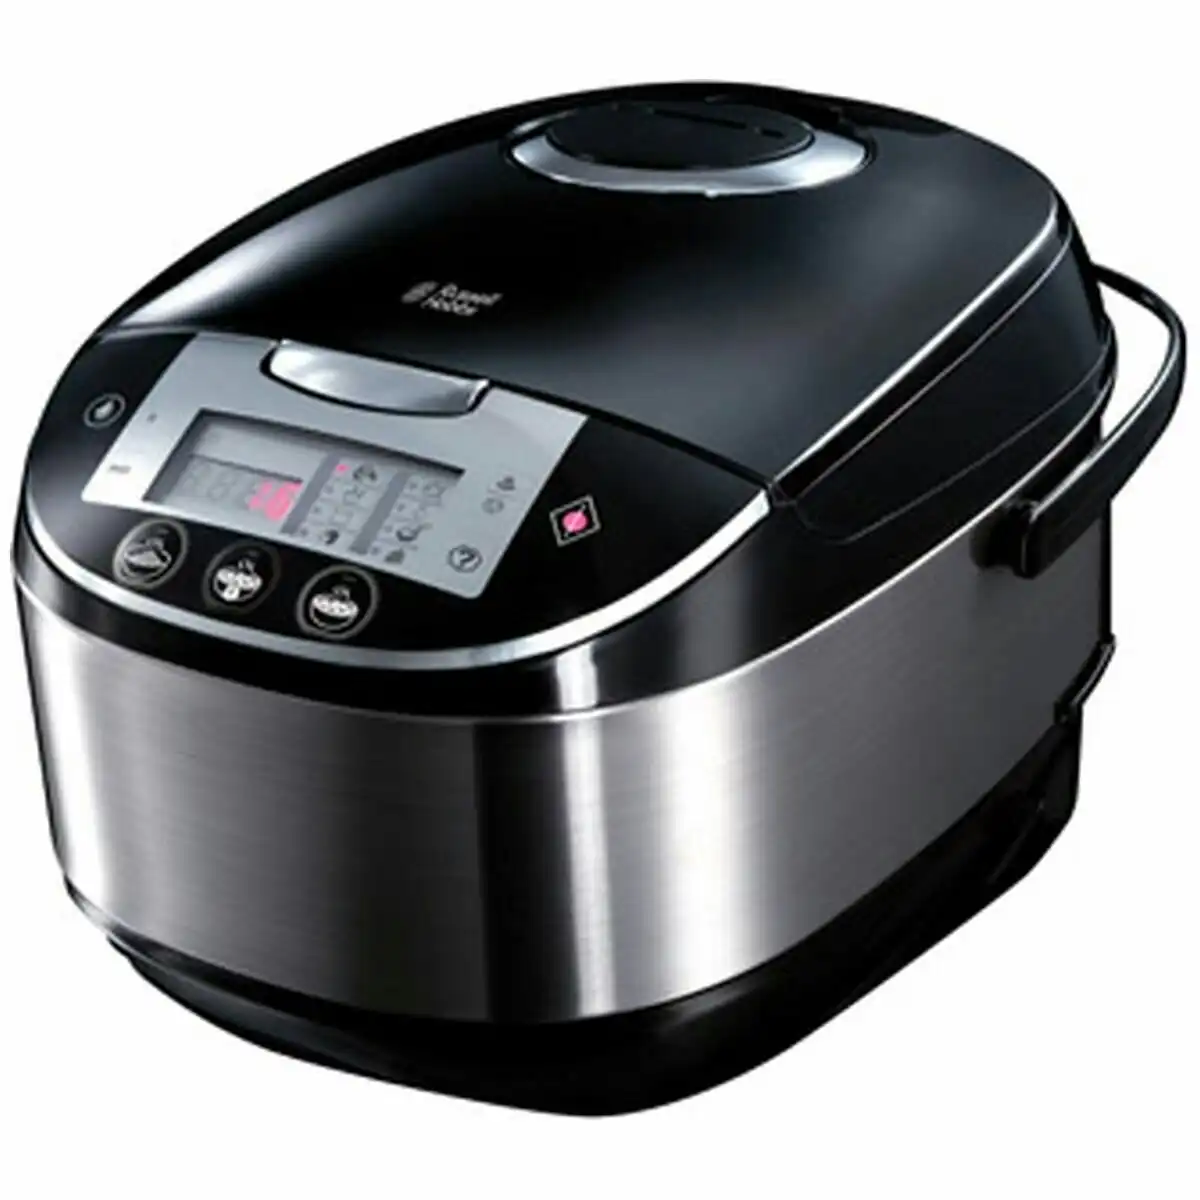 Russell Hobbs Cook Home Multi Cooker